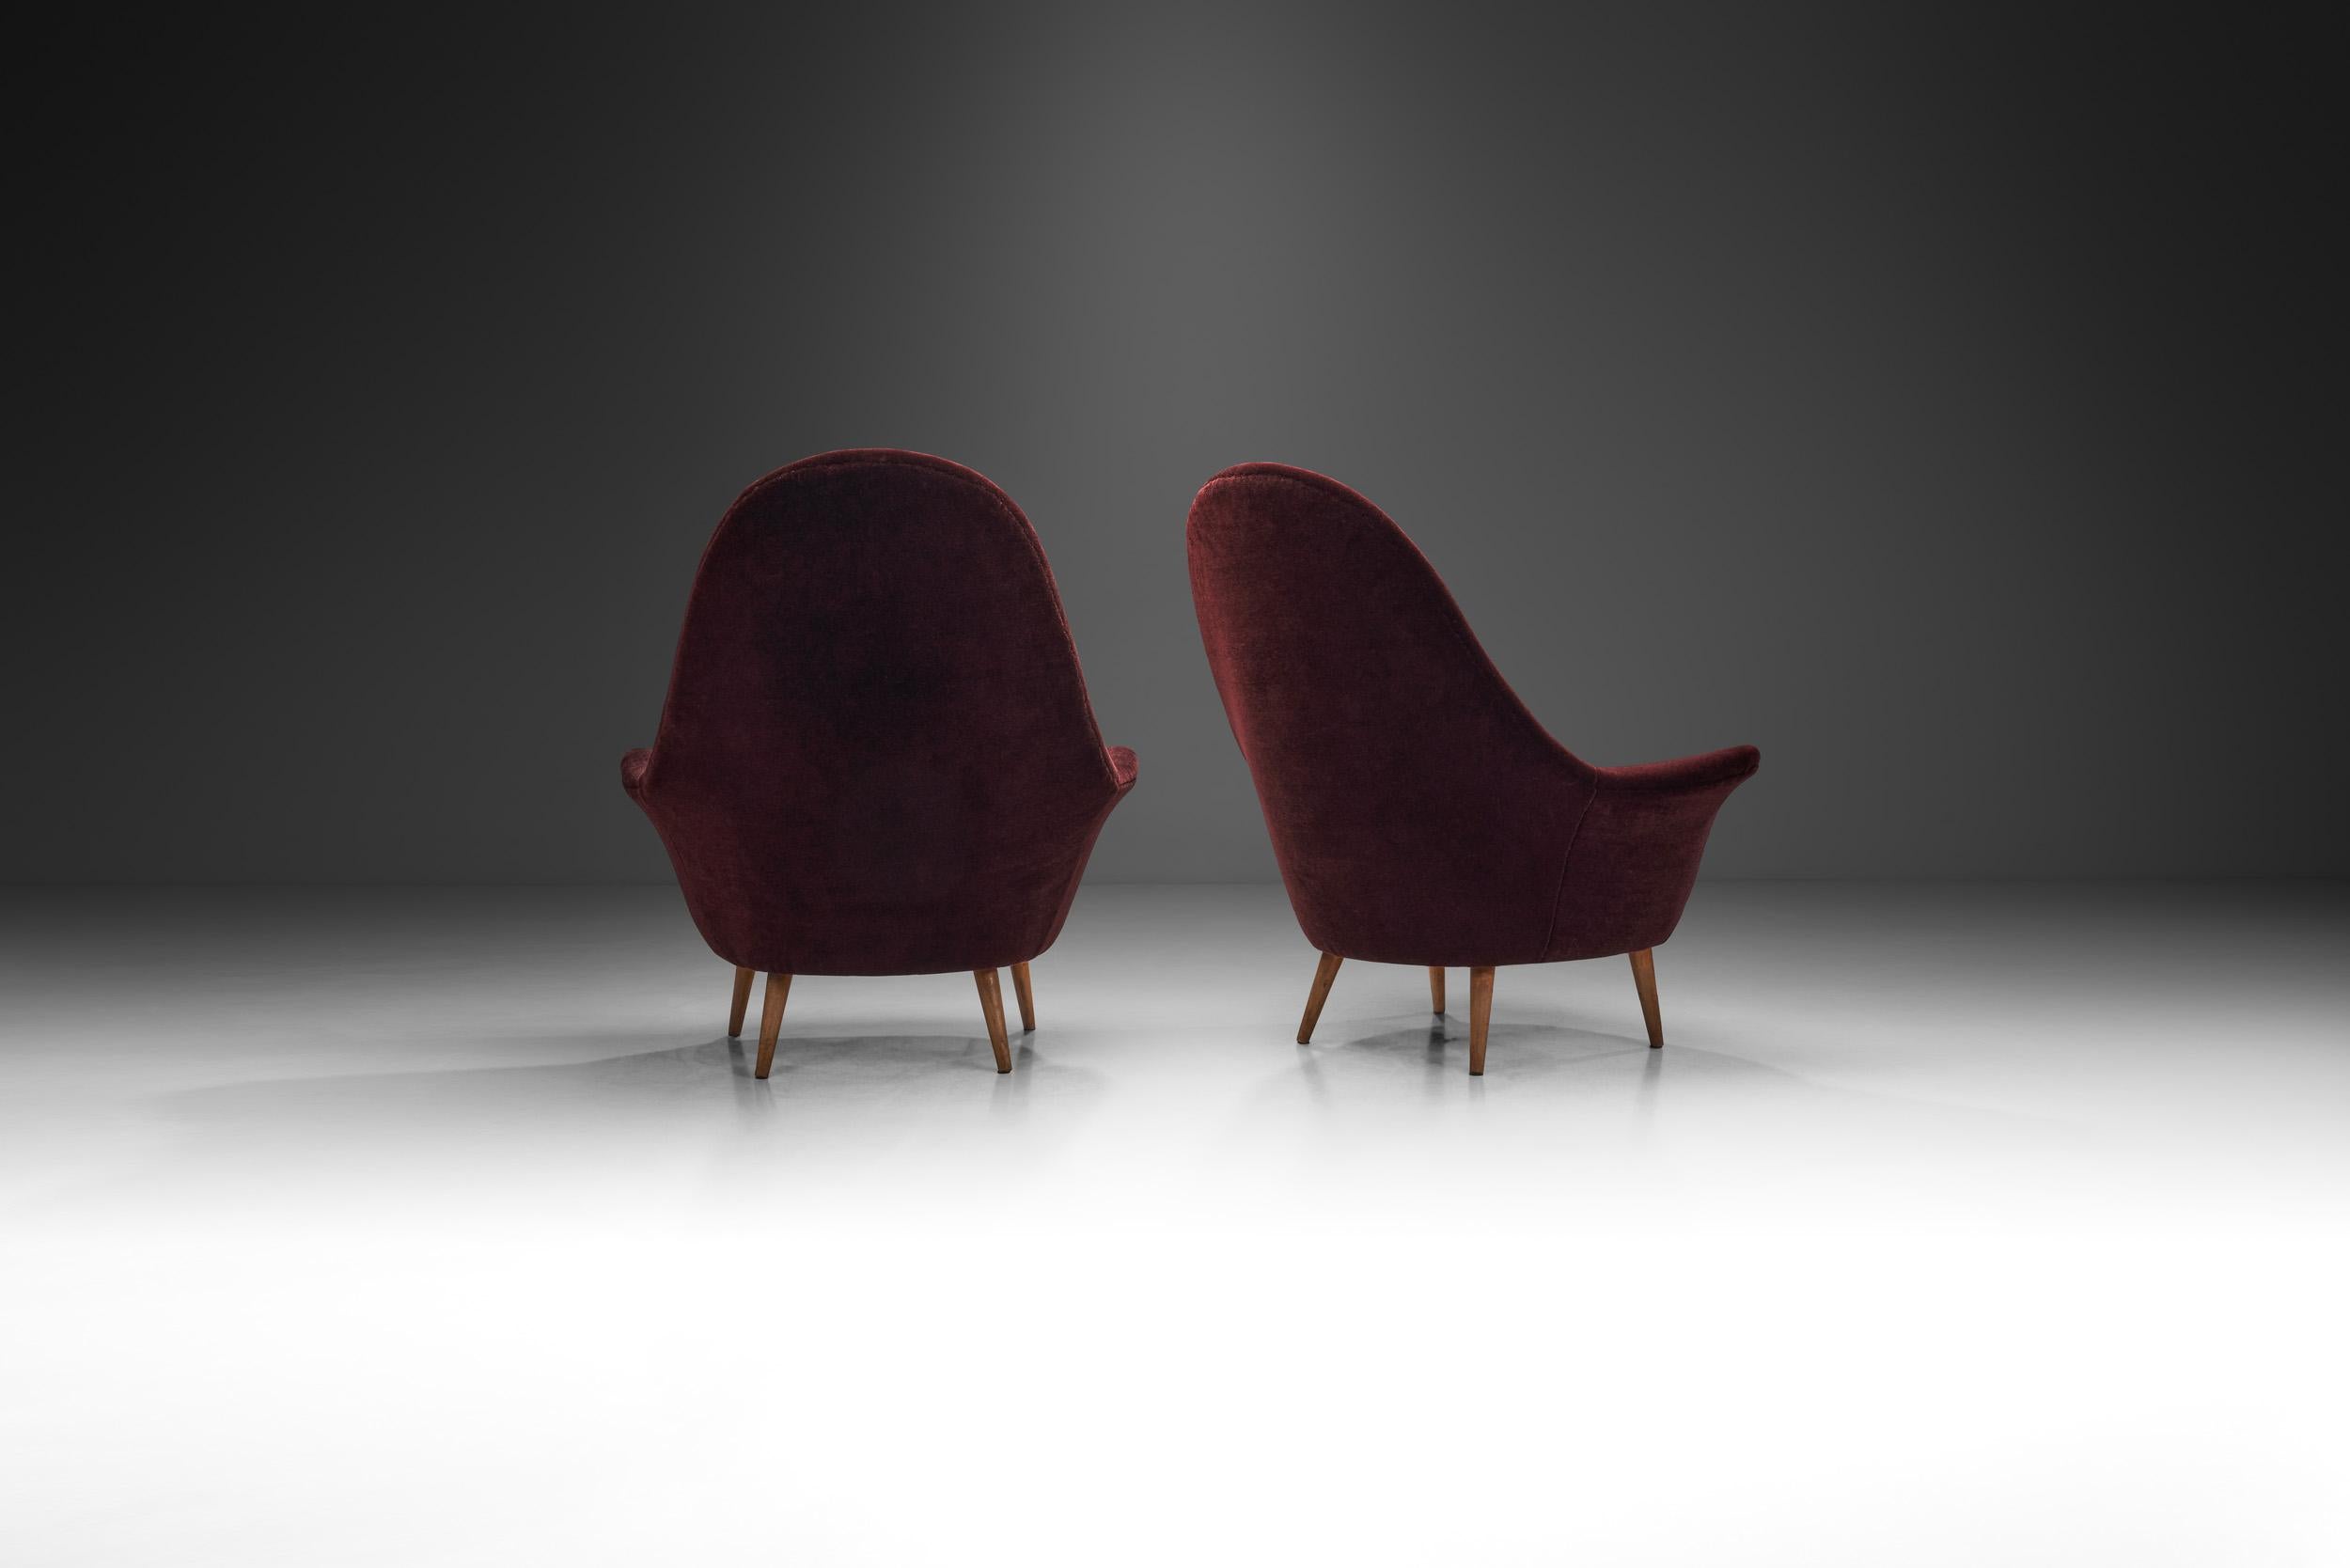 Mid-Century Modern French Lounge Chairs In Aubergine Coloured Mohair, France ca 1960s For Sale